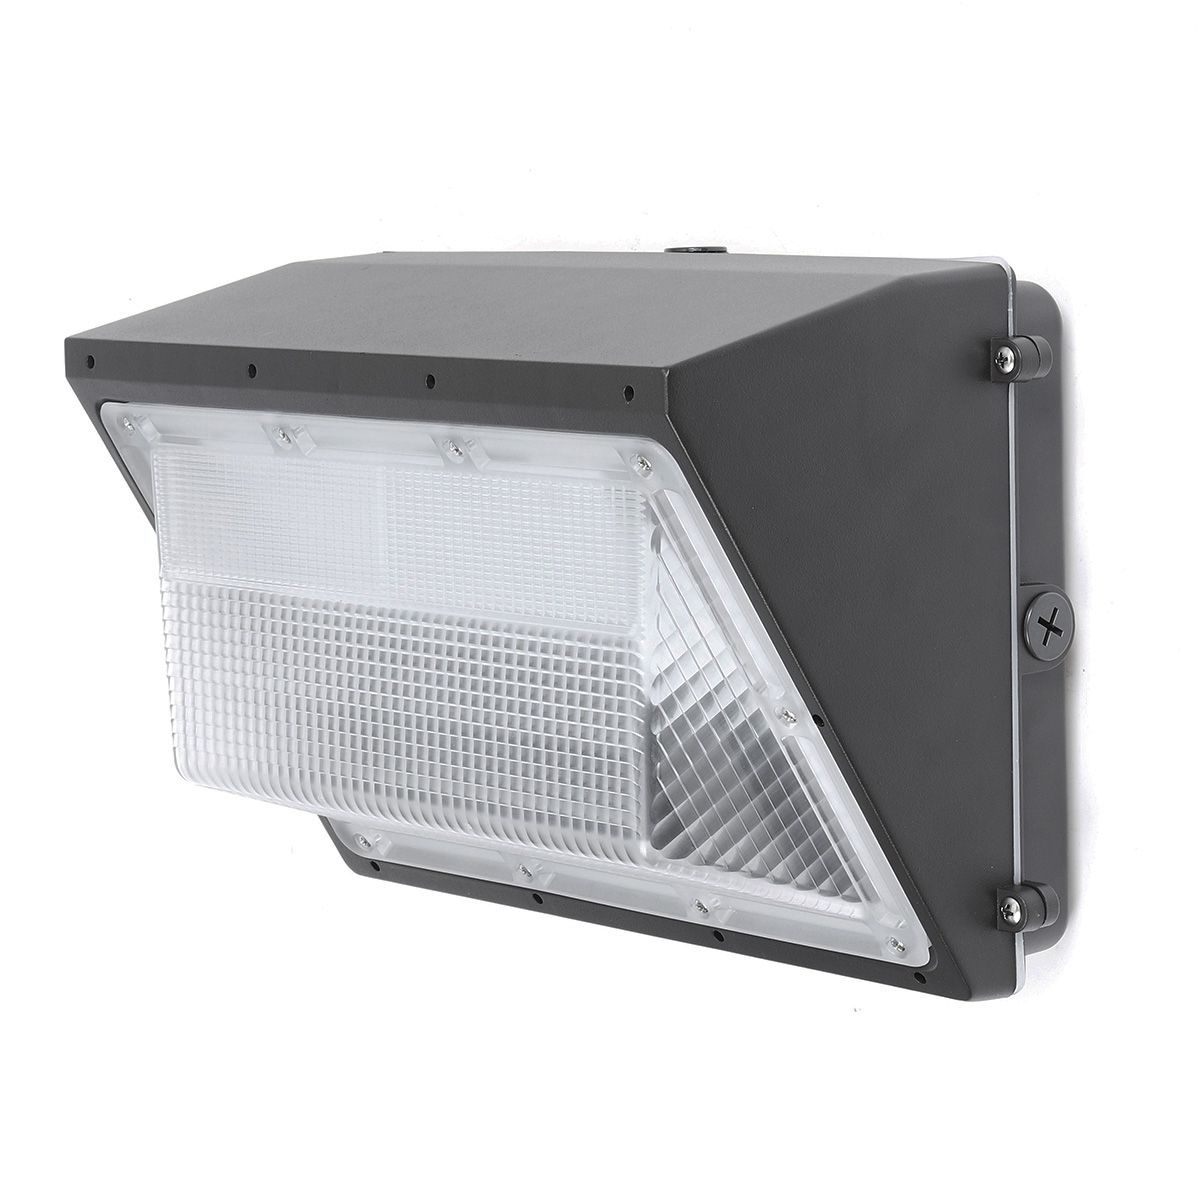 120W-LED-Wall-Pack-Commercial-Industrial-Light-Outdoor-Security-Fixture-Waterpro-Wall-Lamp-1641514